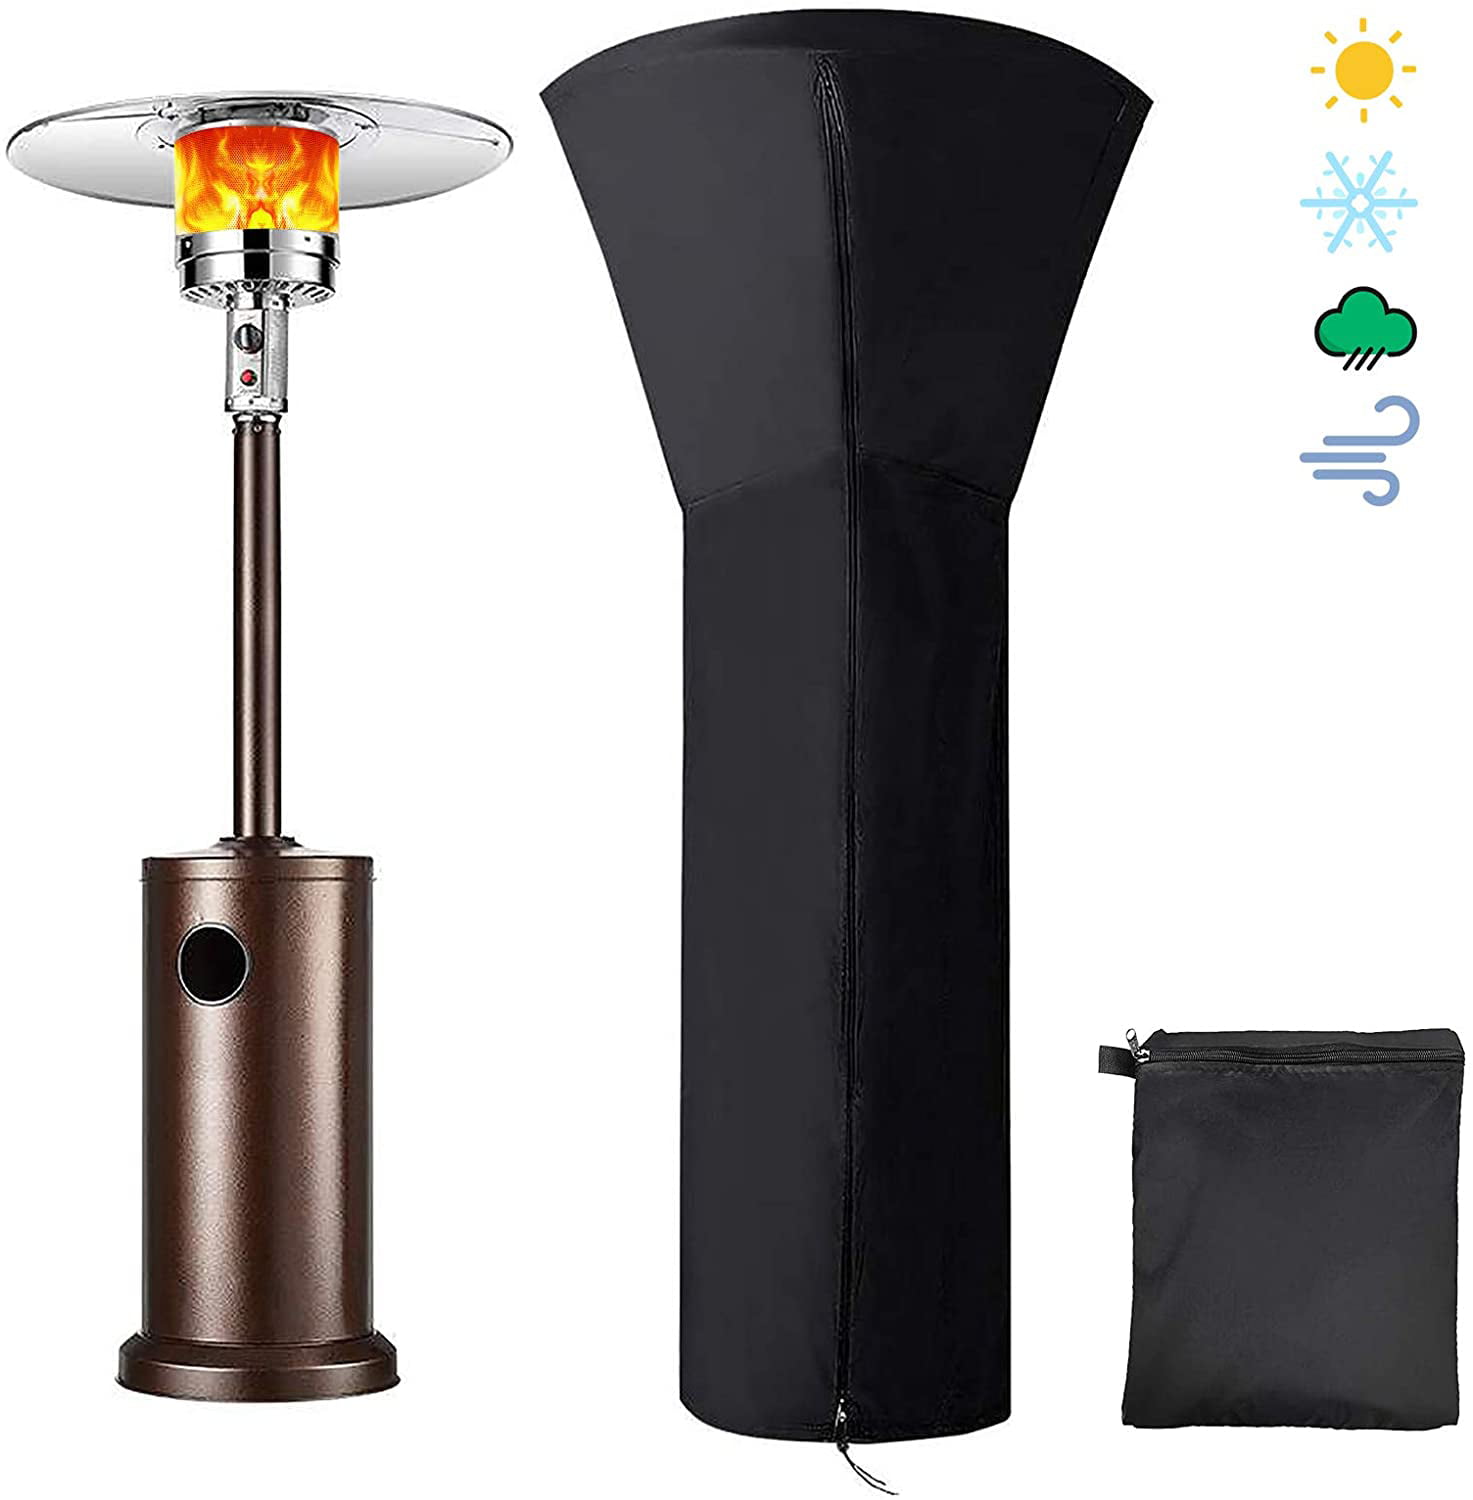 Patio Heater Covers Black 420D Oxford Fabric Waterproof with Zipper Outdoor Heater Protection with Storage Bag 